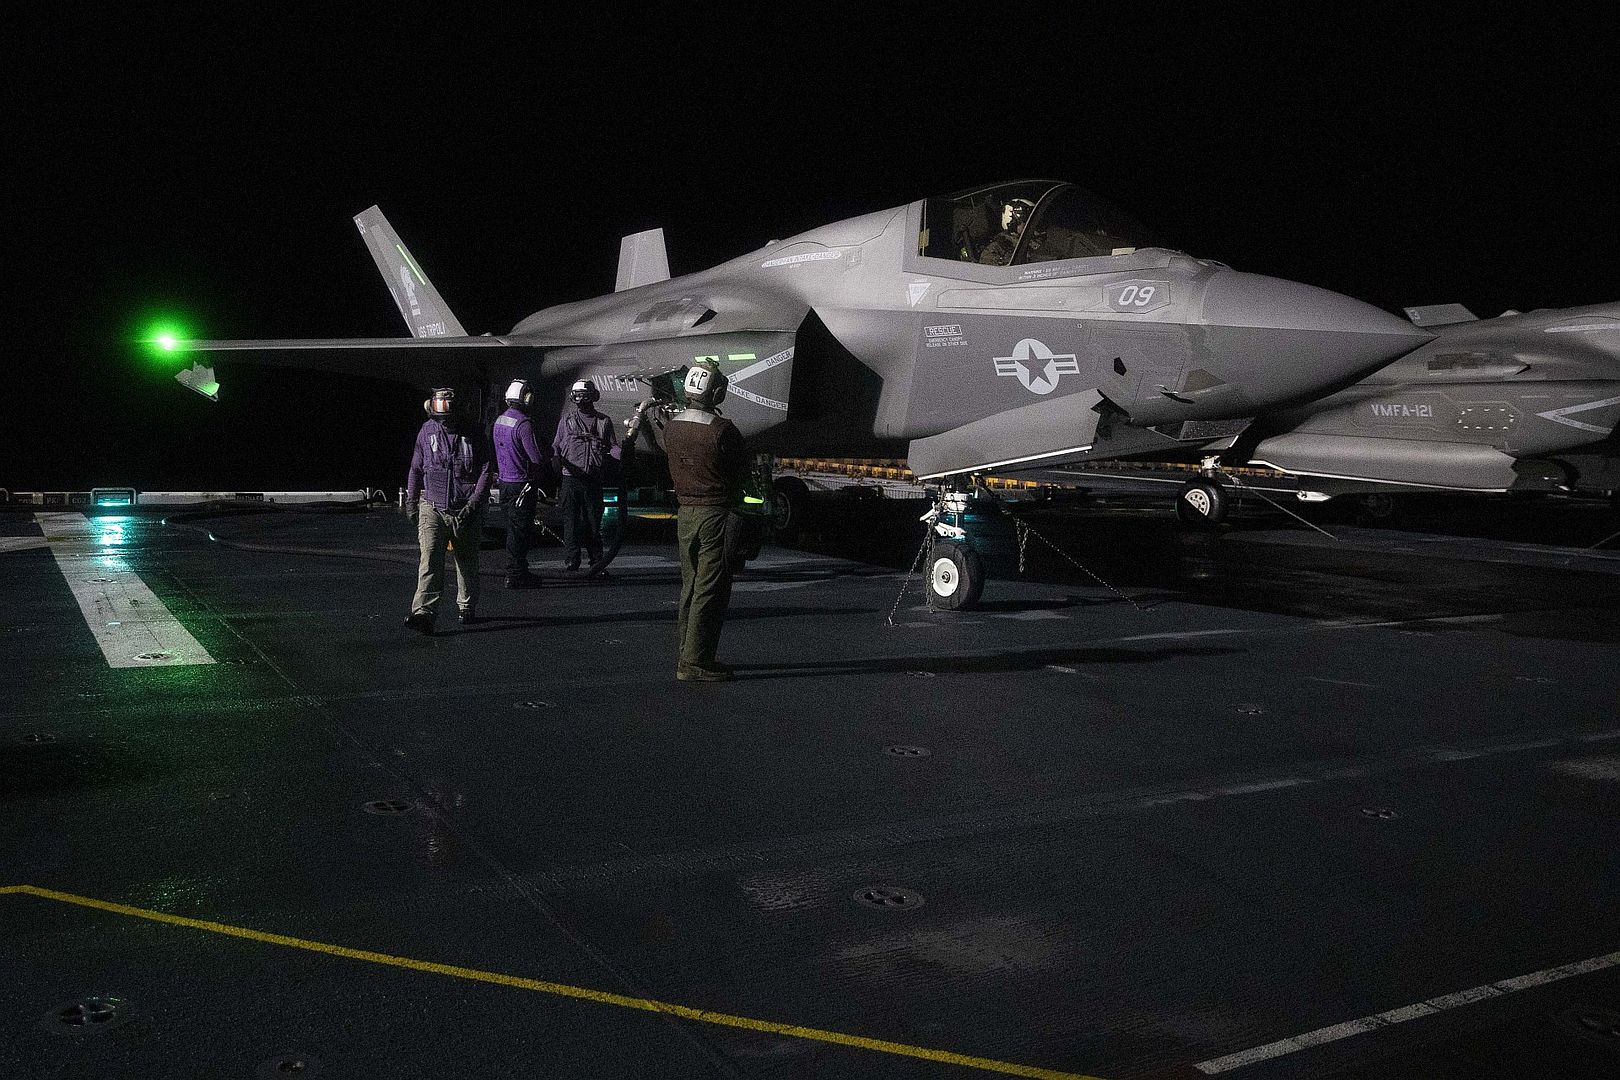 35B Lightning II Aircraft Assigned To Marine Strike Fighter Squadron 121 During Night Flight Operations Aboard Amphibious Assault Carrier USS Tripoli